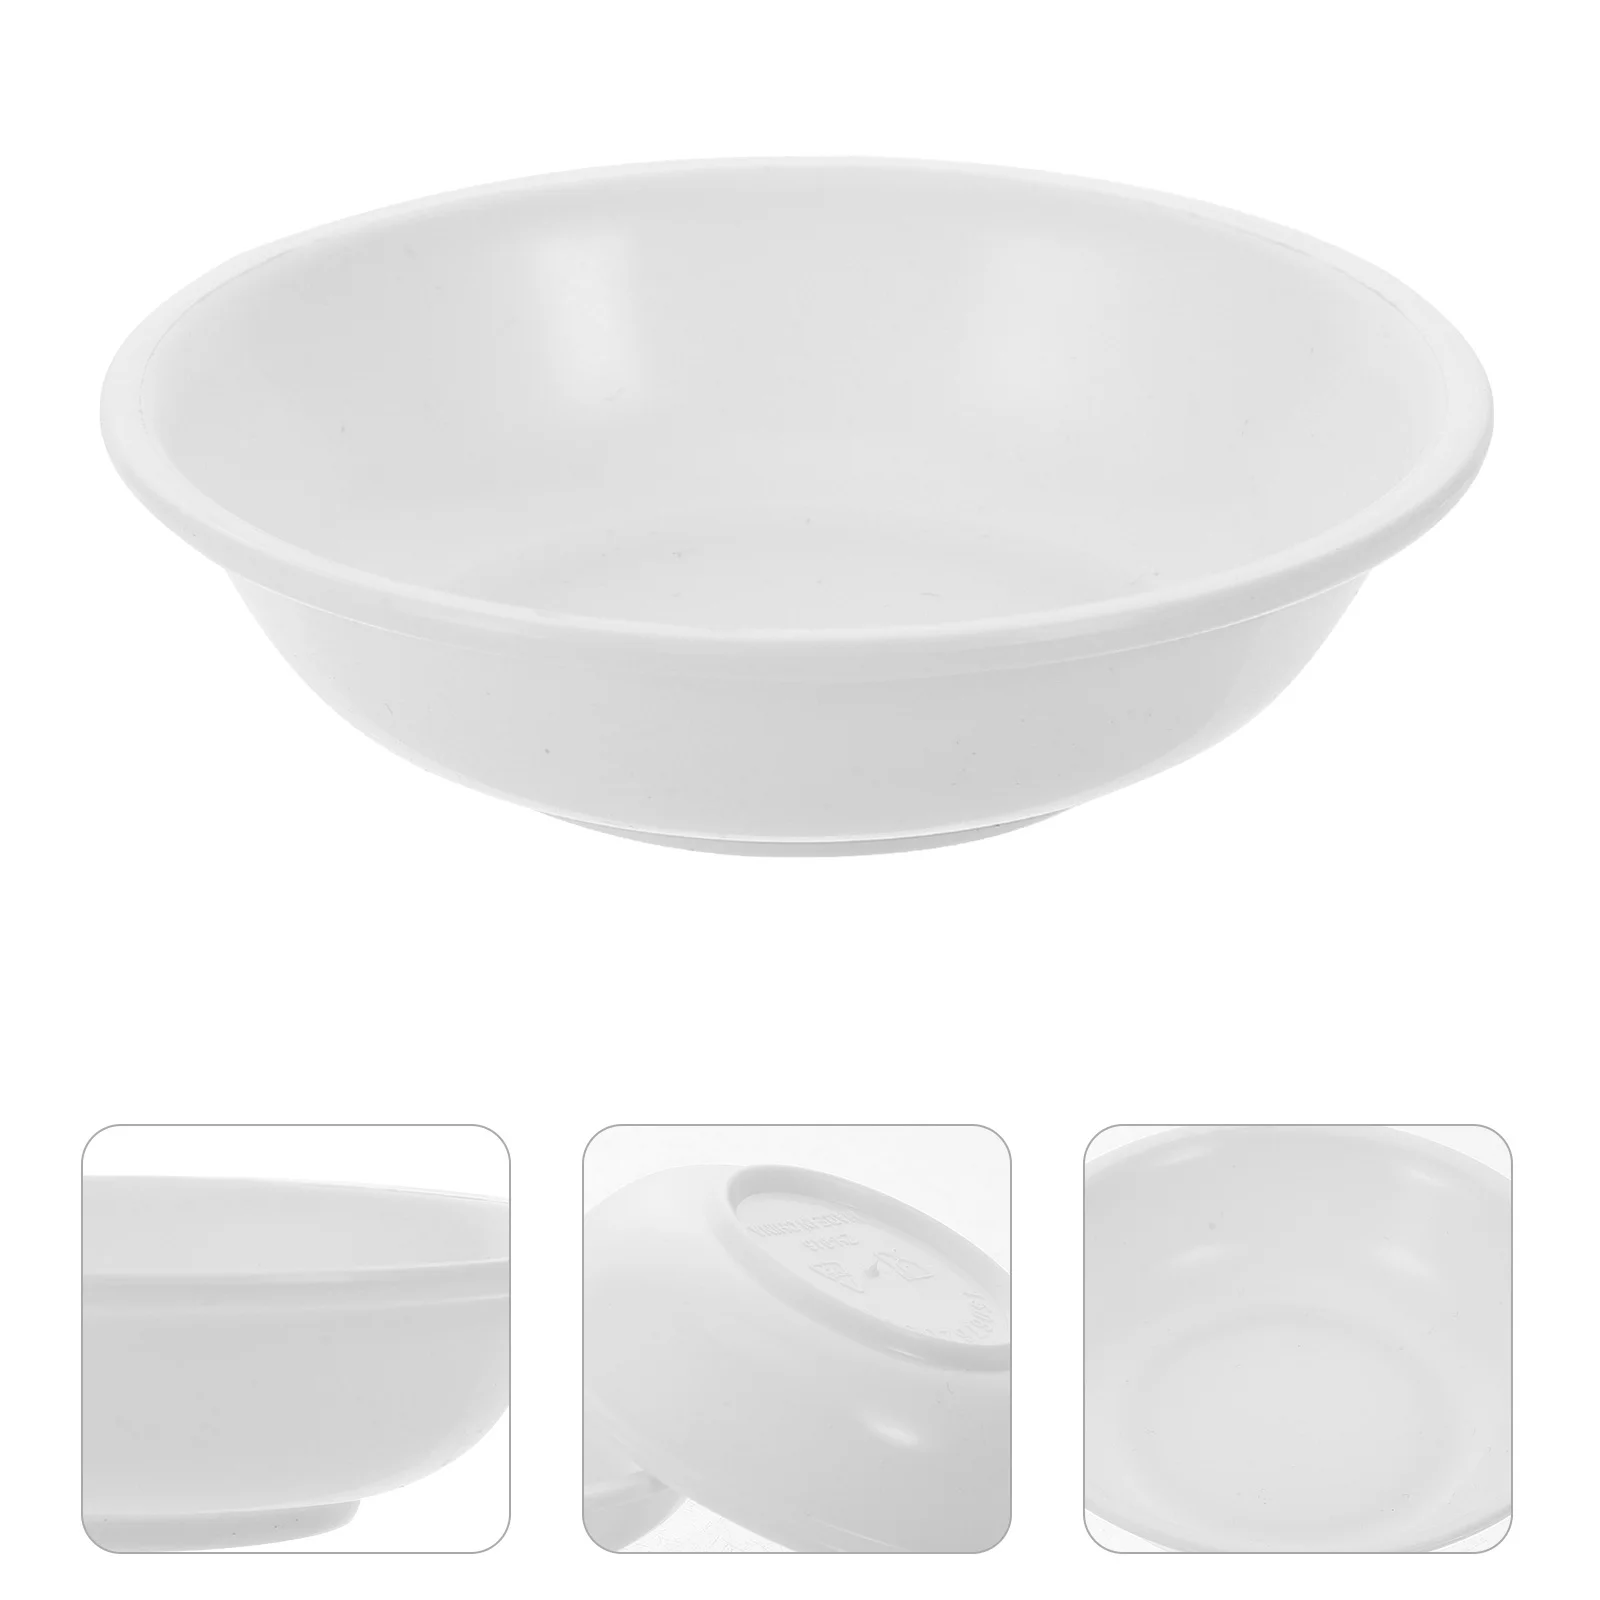 

Sauce Dipping Dish Dishes Bowls Plate Bowl Seasoning Condiment Soy Plates Appetizer Tray Serving Cups Plastic Side Sushi Mini